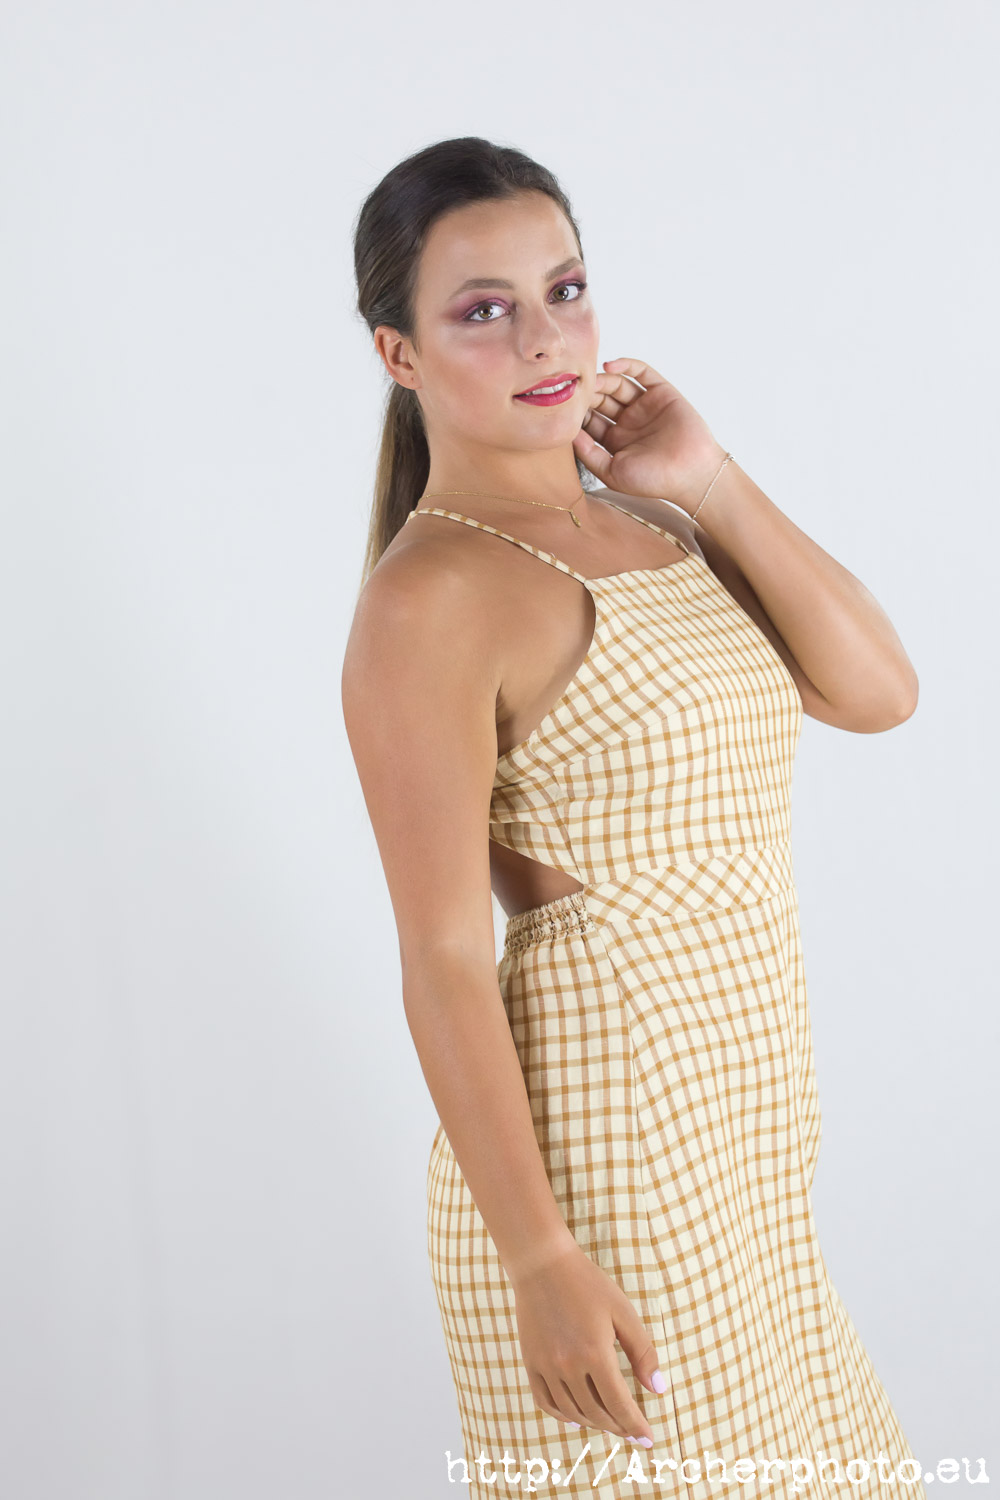 Patricia in a yellow dress, by Archerphoto, professional photographer in Spain